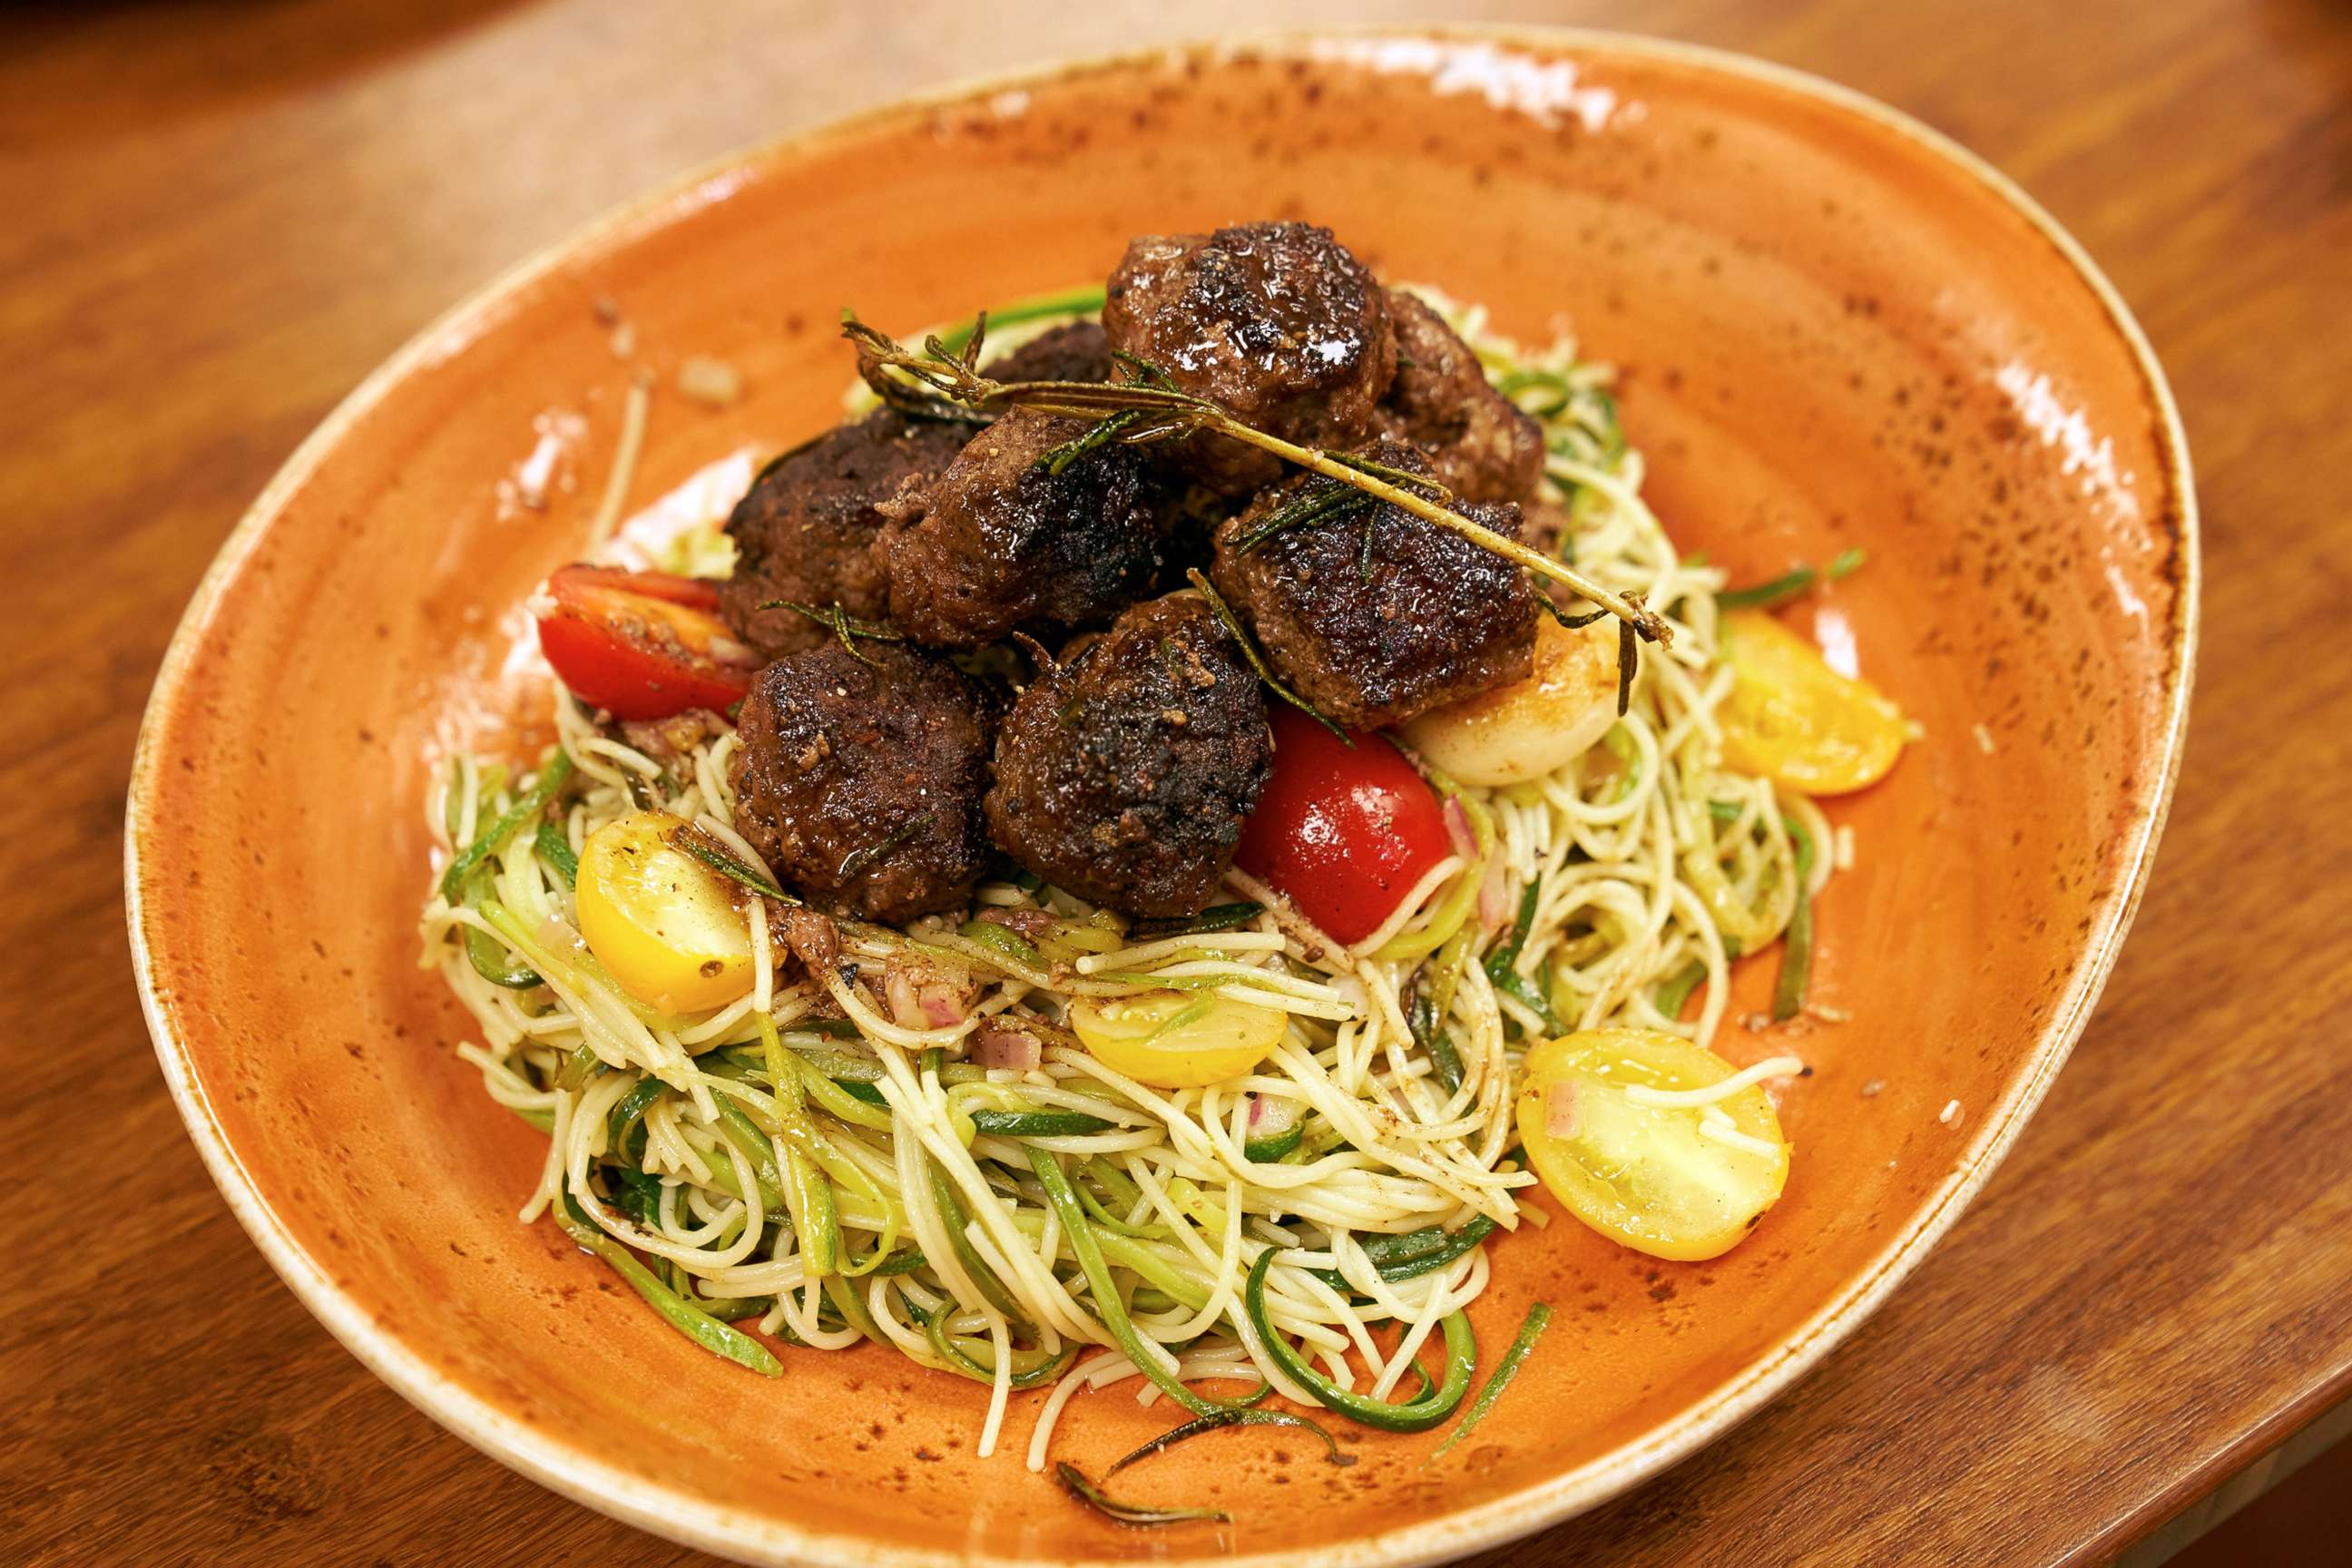 PHOTO: "Green Spaghetti and Chicken Meatballs," is made with zucchini noodles and angel hair pasta topped with meatballs.